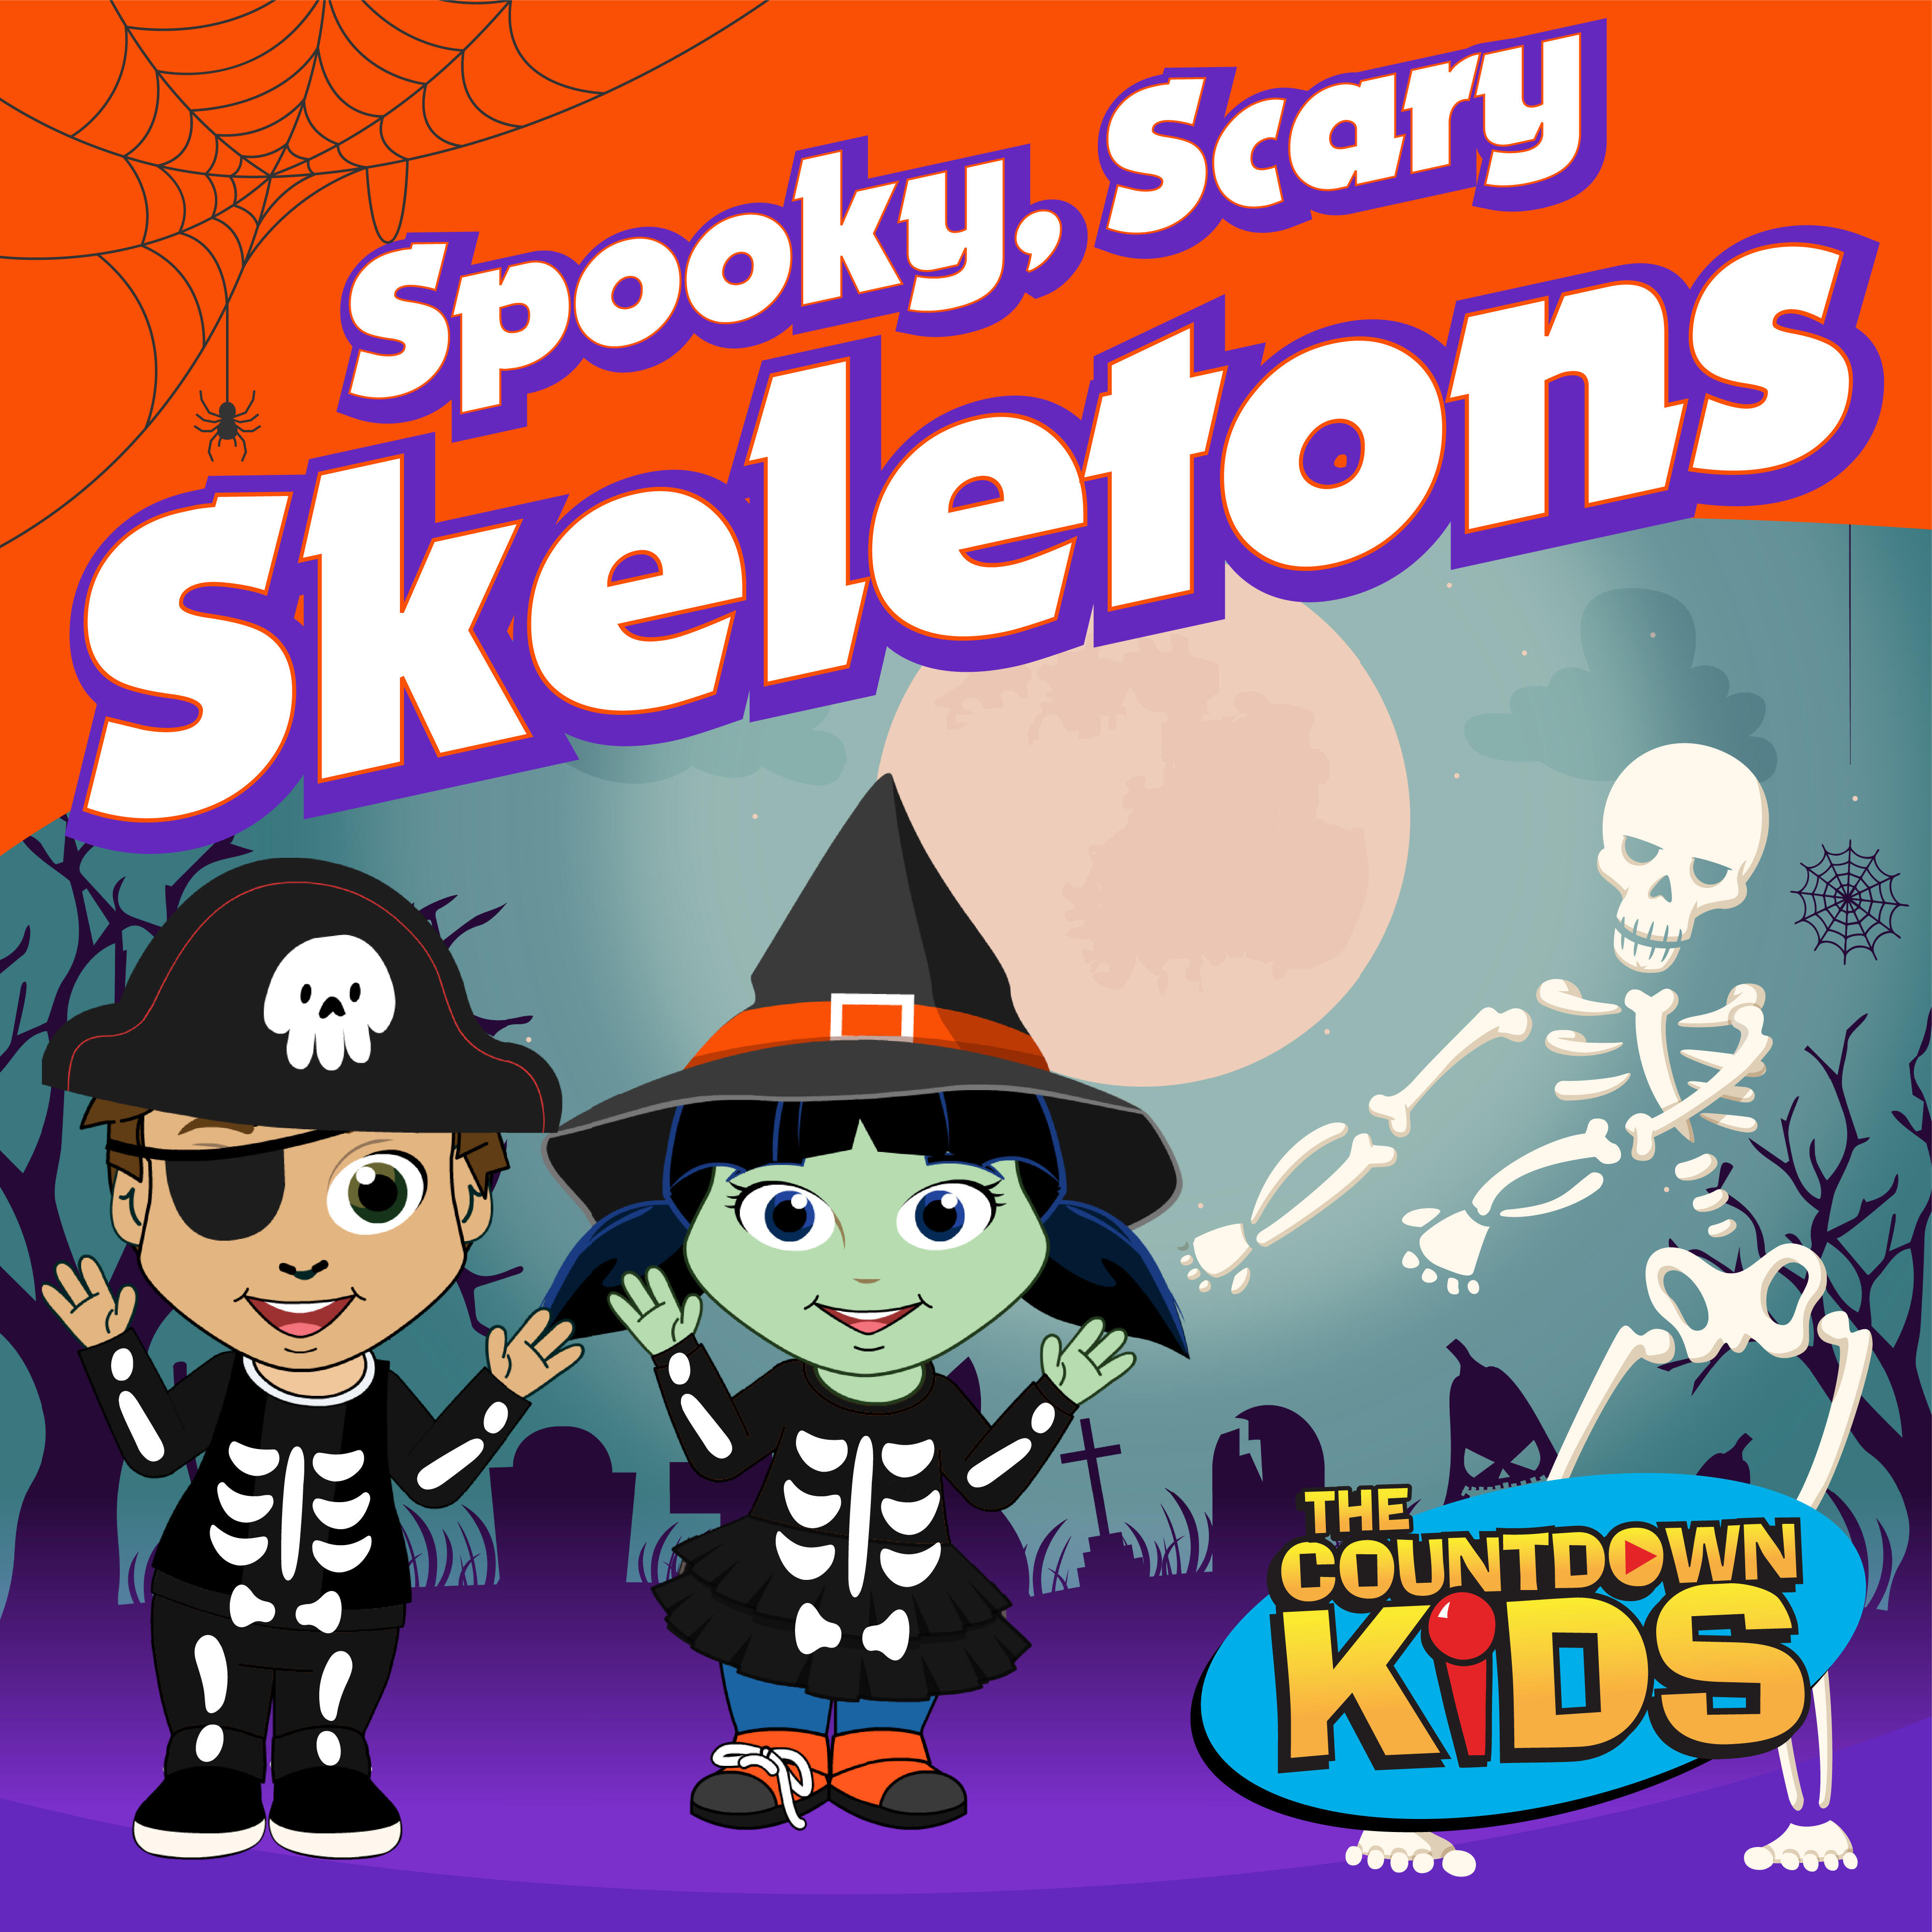 The Countdown Kids - Spooky, Scary Skeletons | iHeart